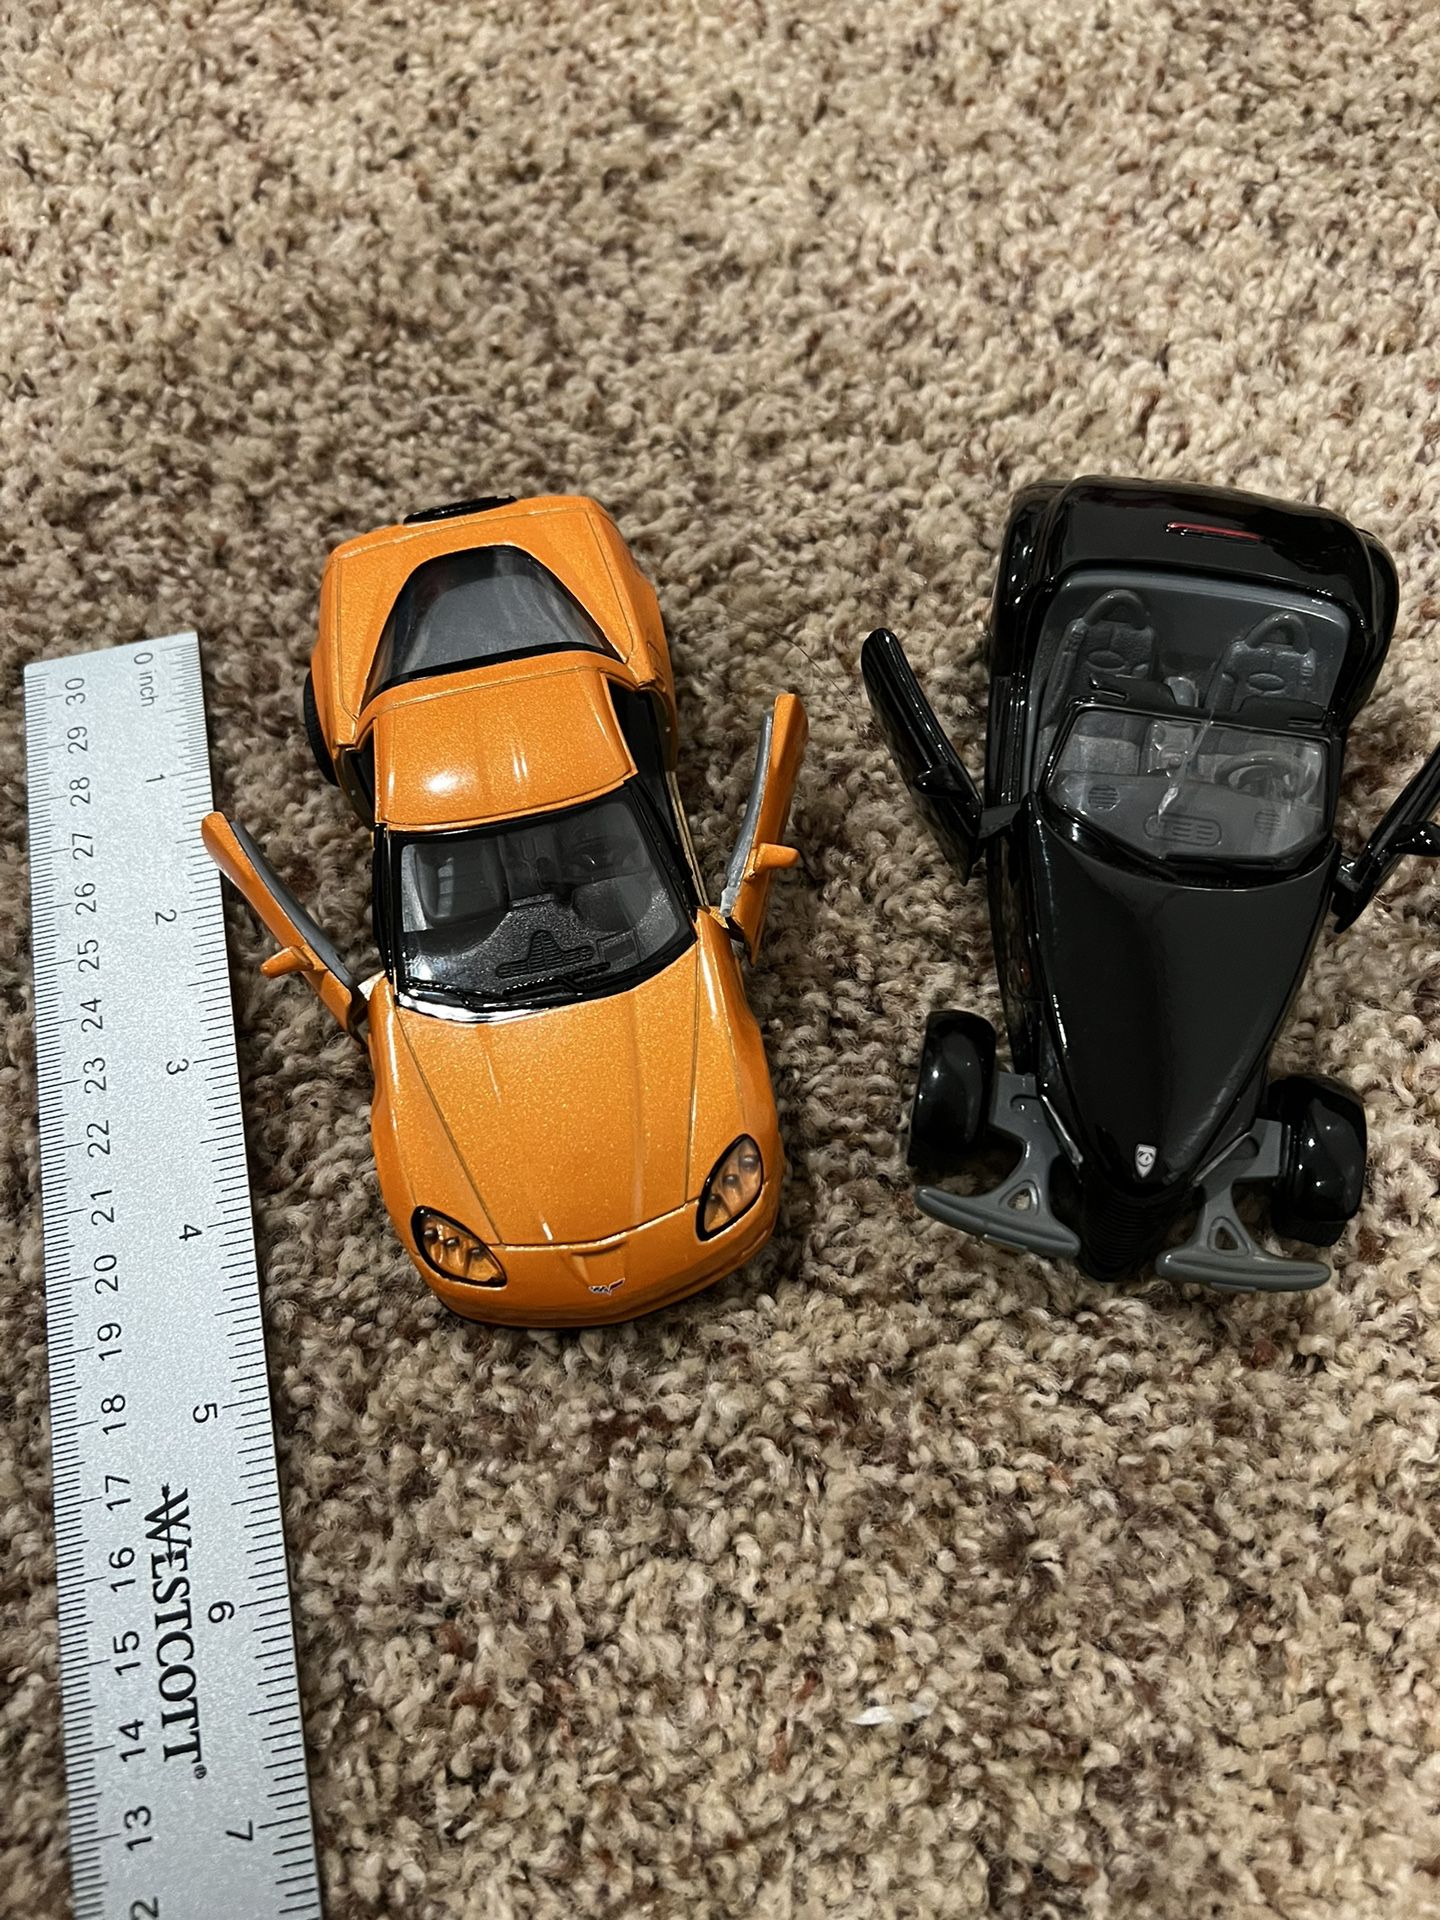 2 collectible cars ( black car’s glass is cracked )